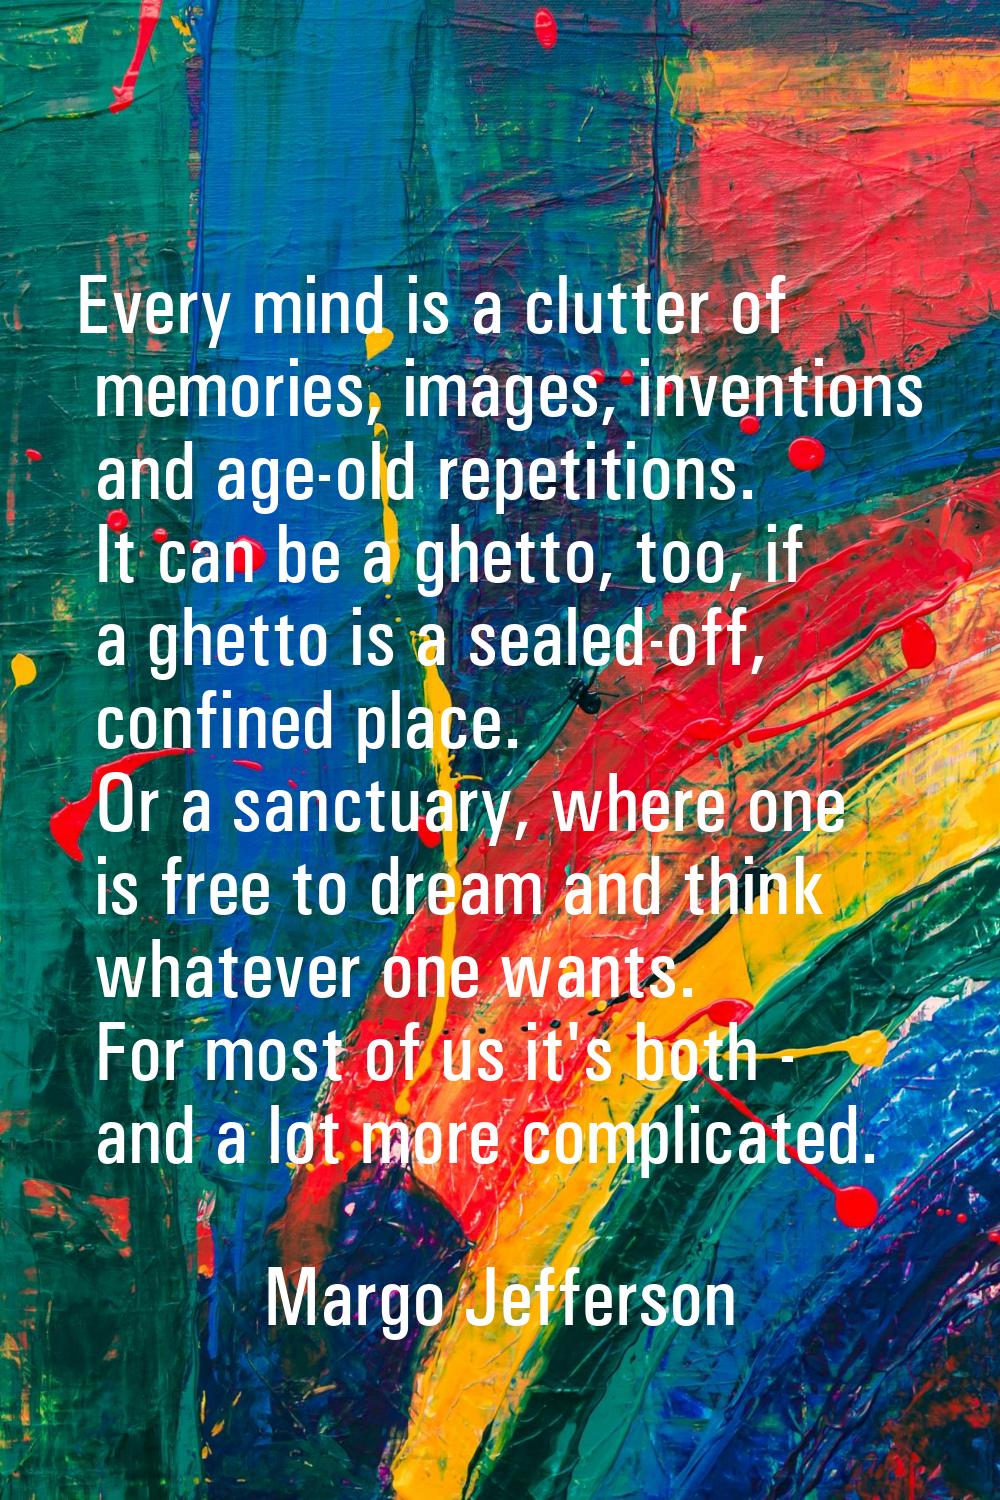 Every mind is a clutter of memories, images, inventions and age-old repetitions. It can be a ghetto